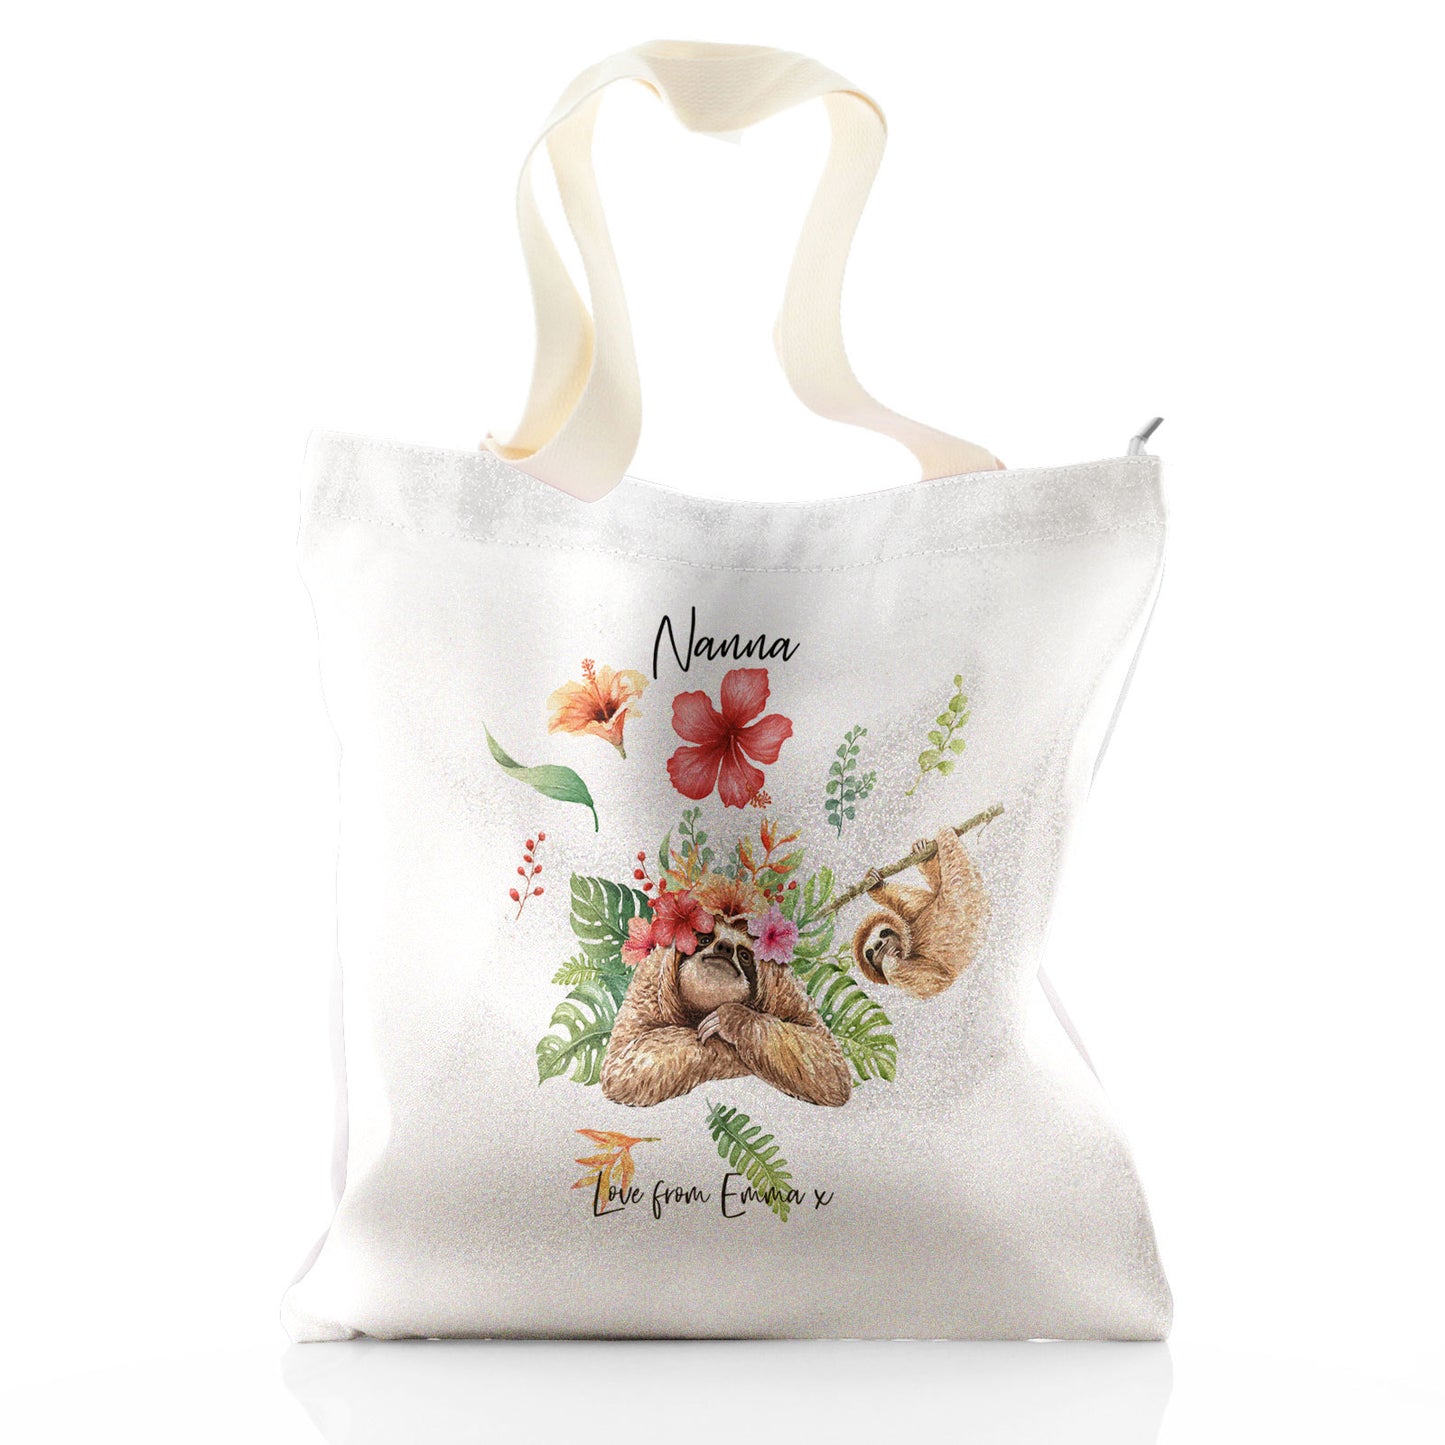 Personalised Glitter Tote Bag with Stylish Text and Floral Mum and Baby Sloths